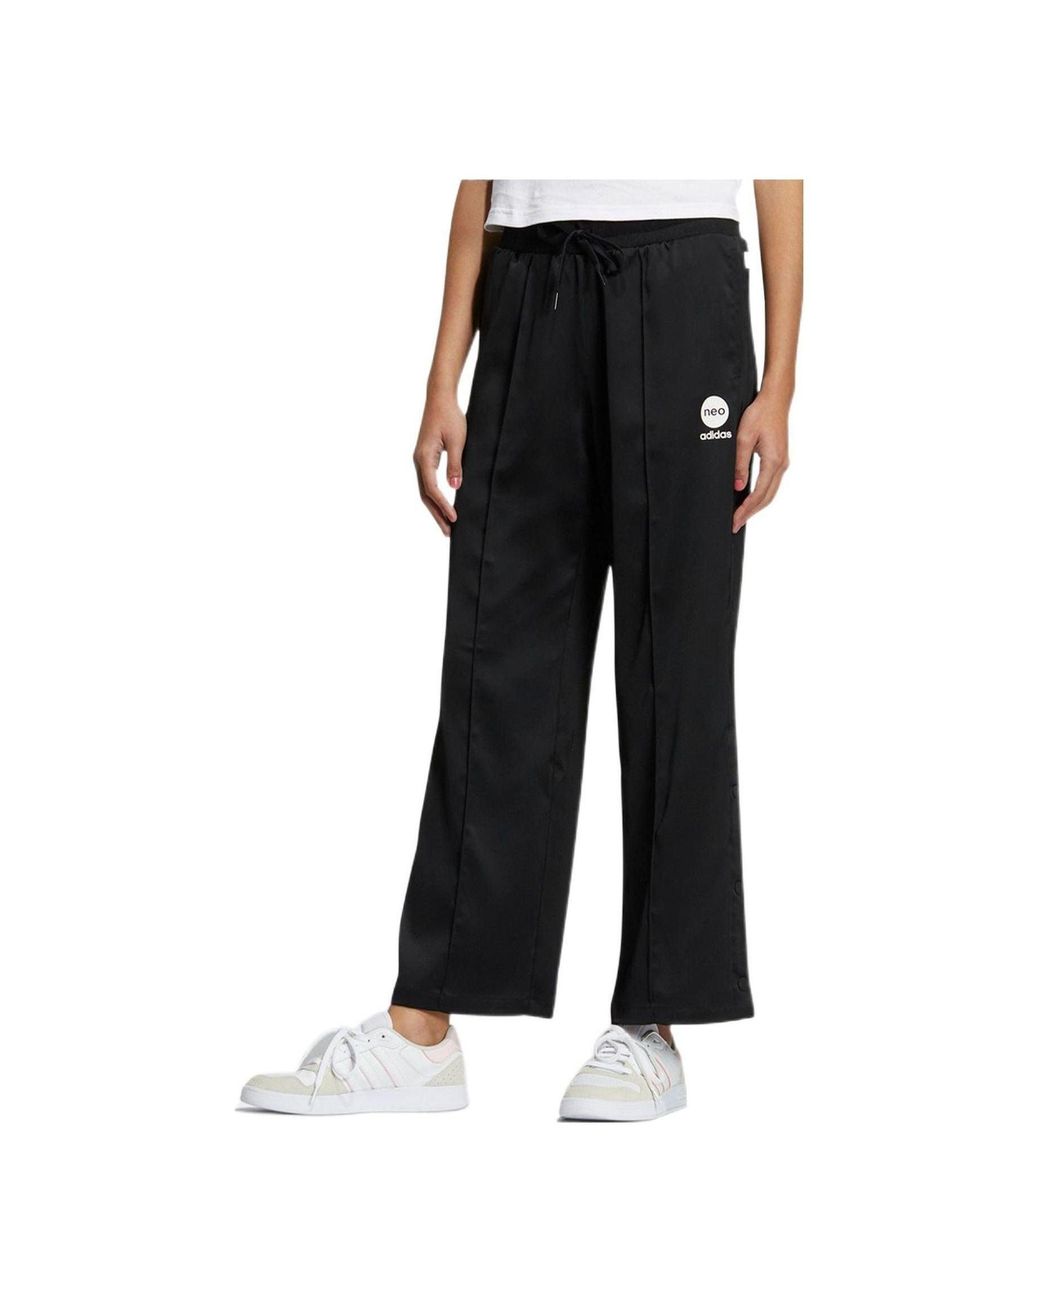 adidas Neo Basketball Pants in Black | Lyst